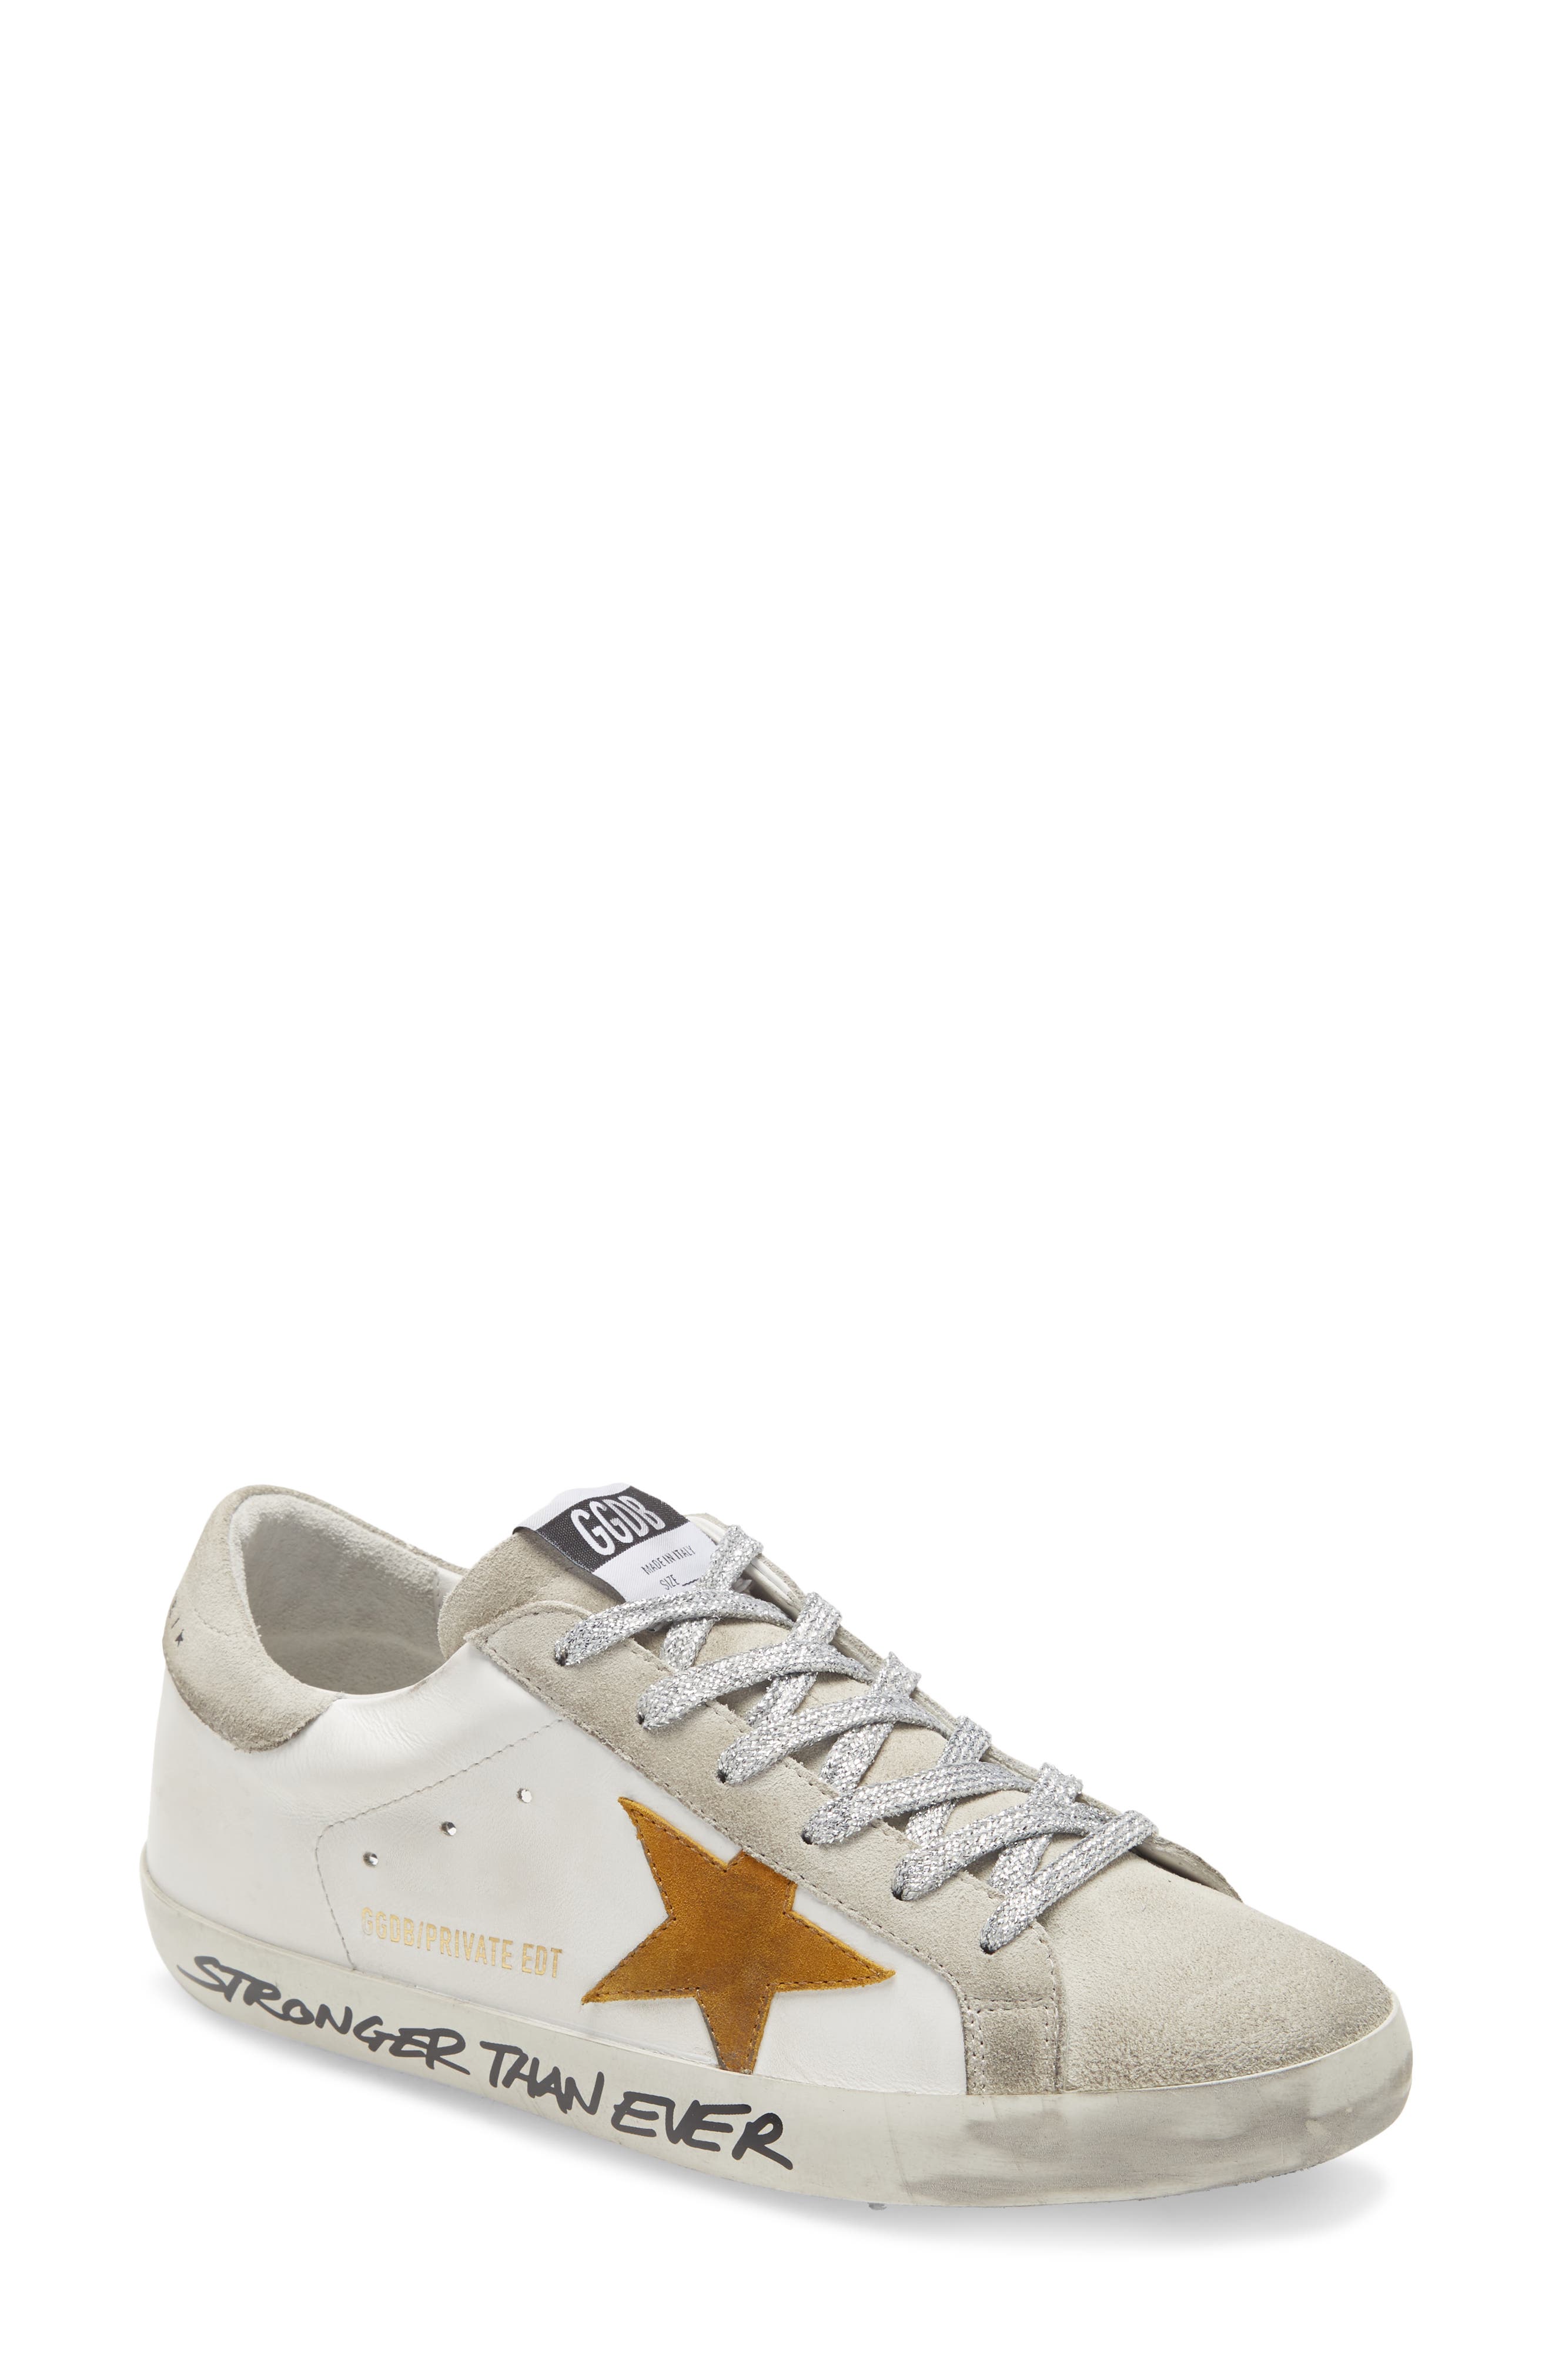 Buy > private edition golden goose > in stock